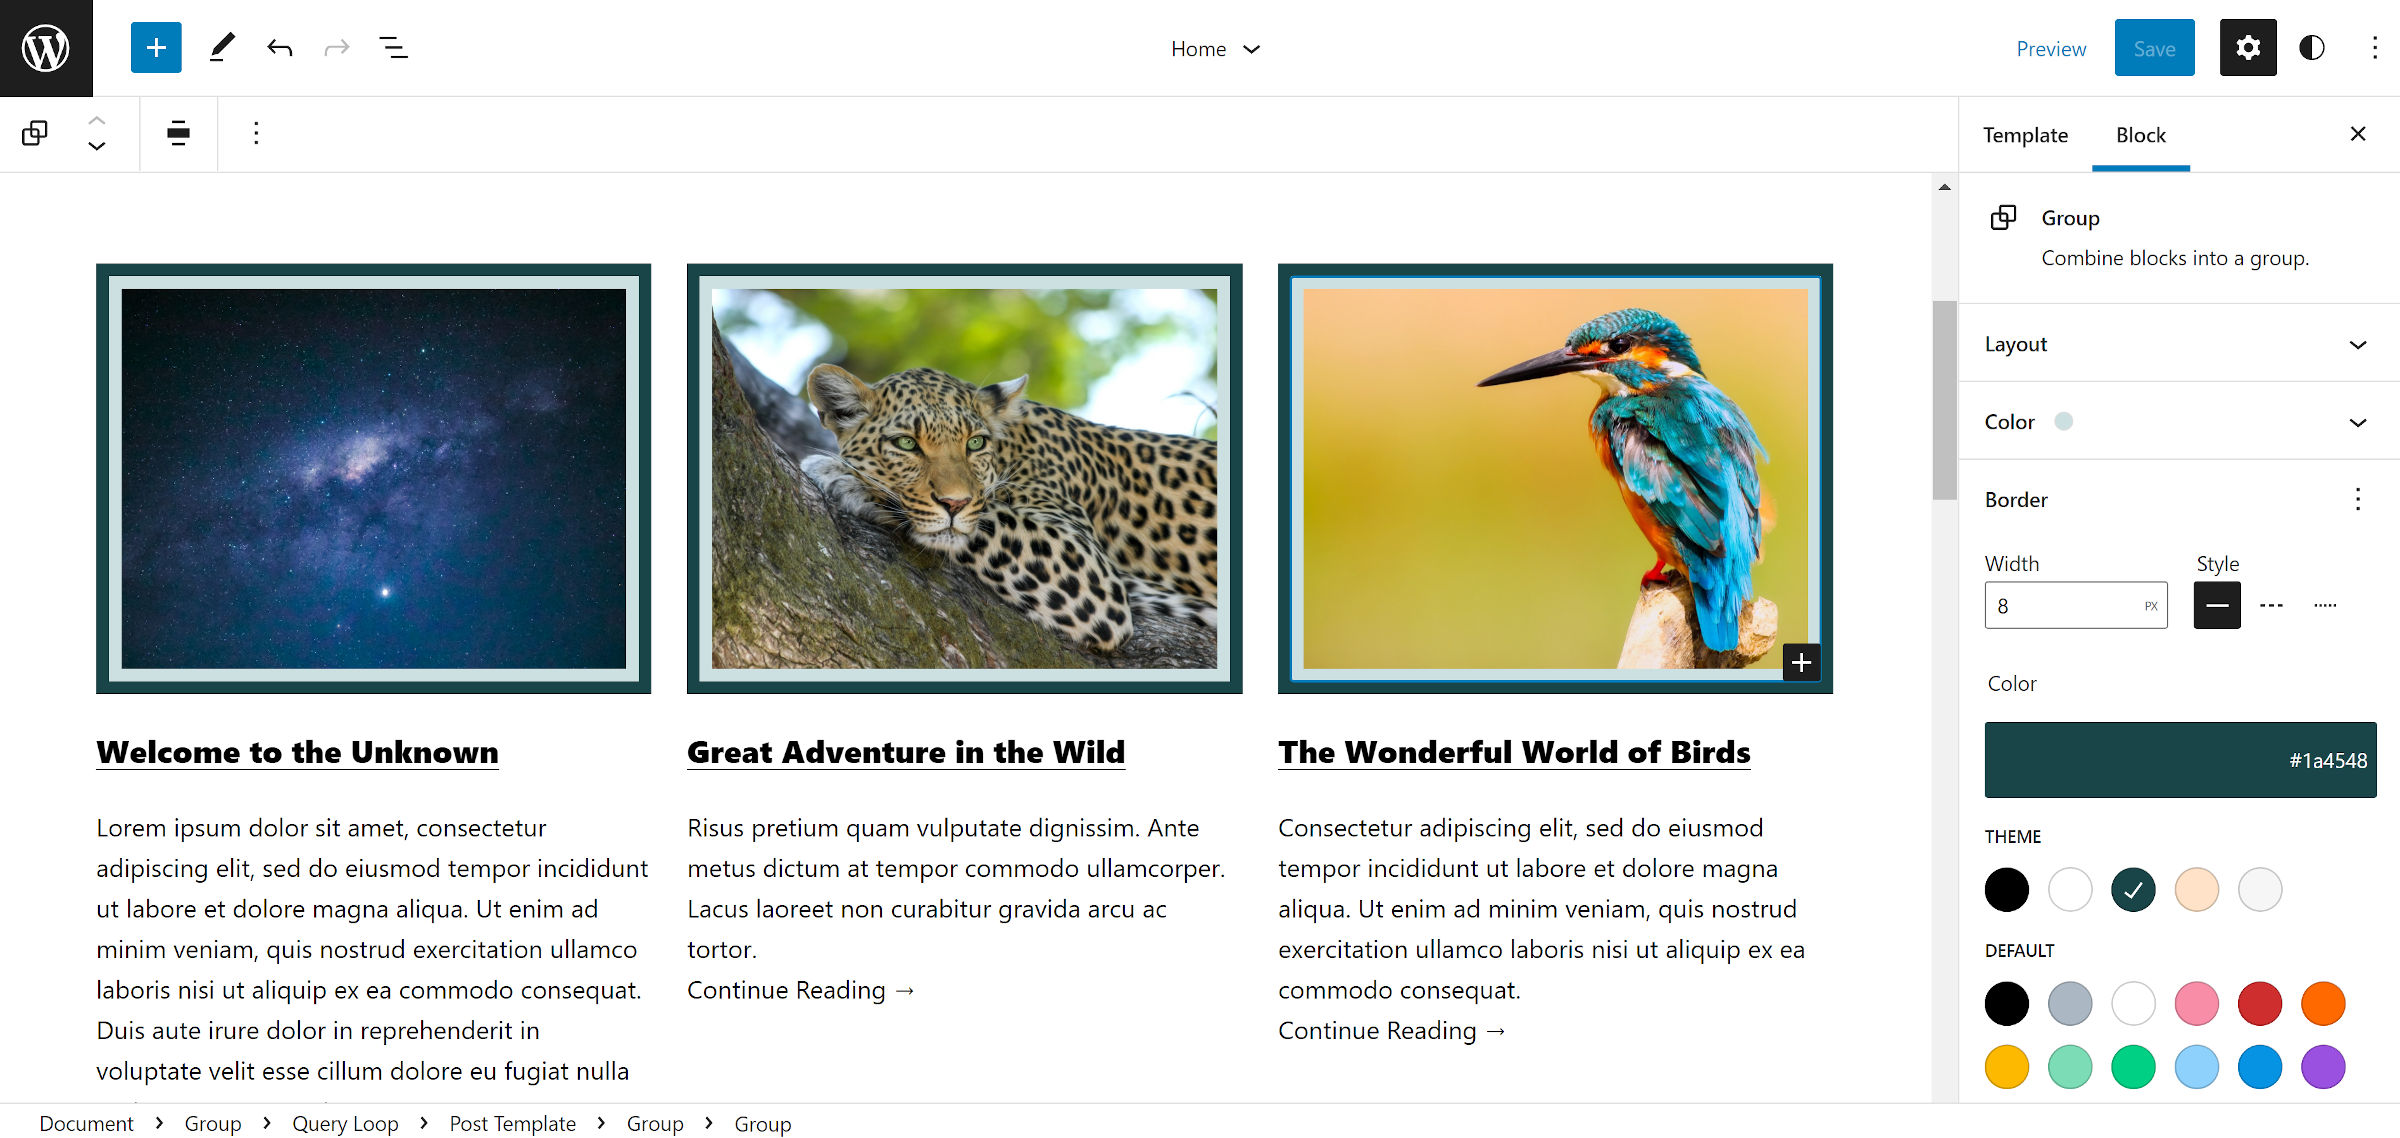 Customizing a Group block's colors and borders in the WordPress site editor that is wrapped around the featured image.